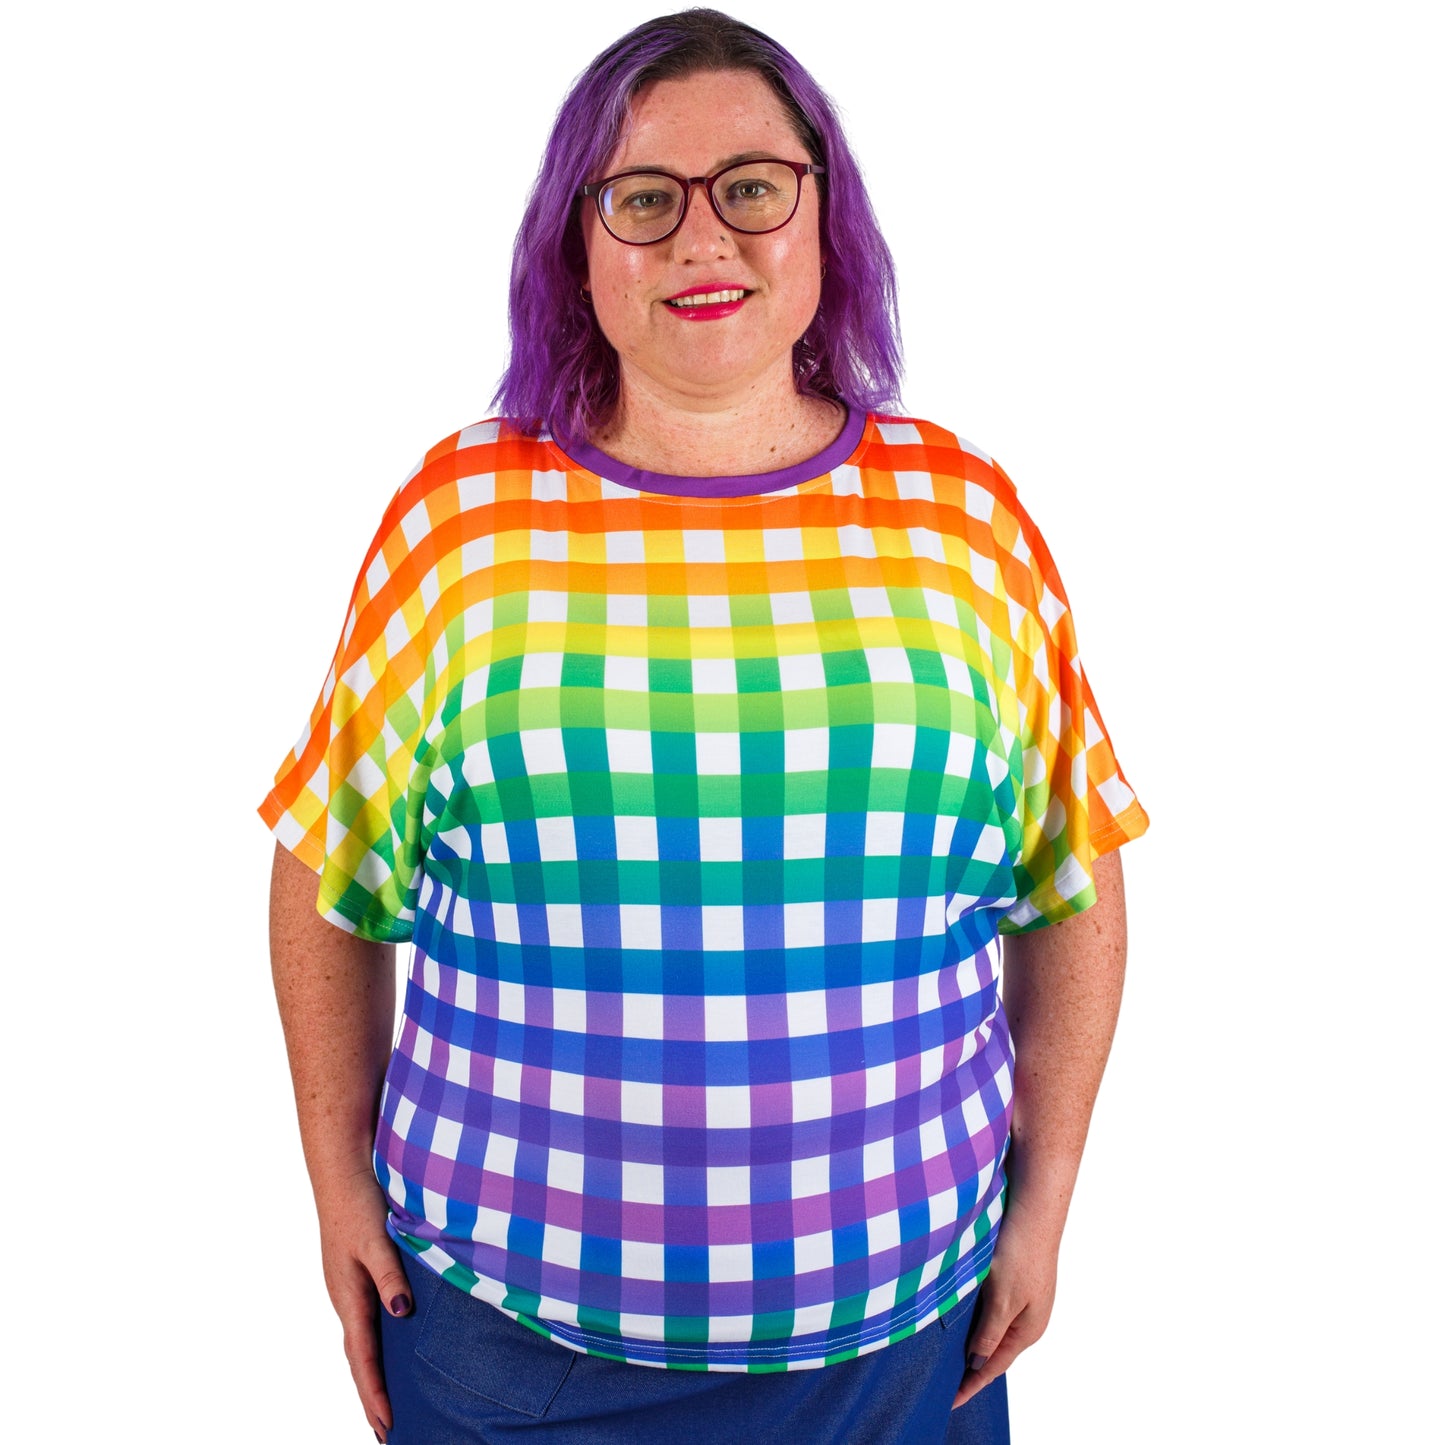 Rainbow Gingham Batwing Top by RainbowsAndFairies.com.au (Check - Picnic - Pride - Knit Top - Vintage Inspired - Retro Shirt - Kitsch) - SKU: CL_BATOP_GINGH_RBW - Pic-03